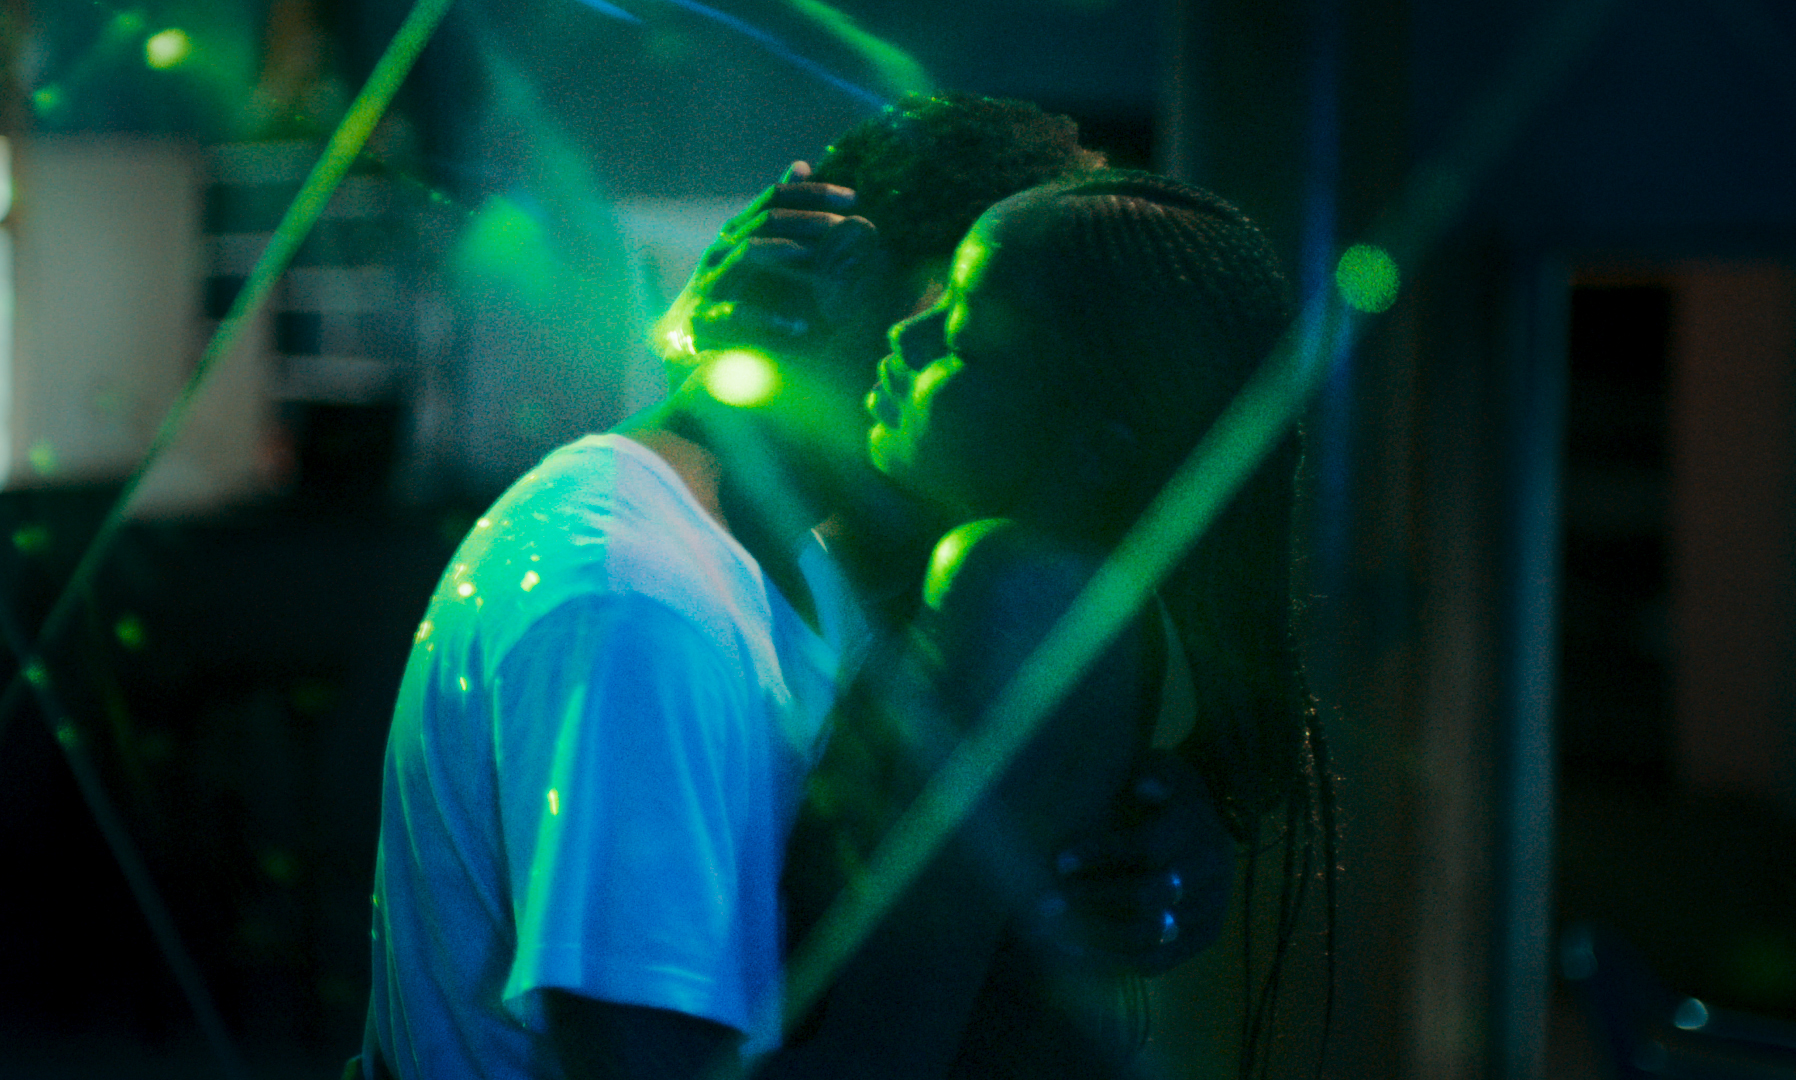 Still from the film Atlantics shows two people embracing in a dark nightclub.